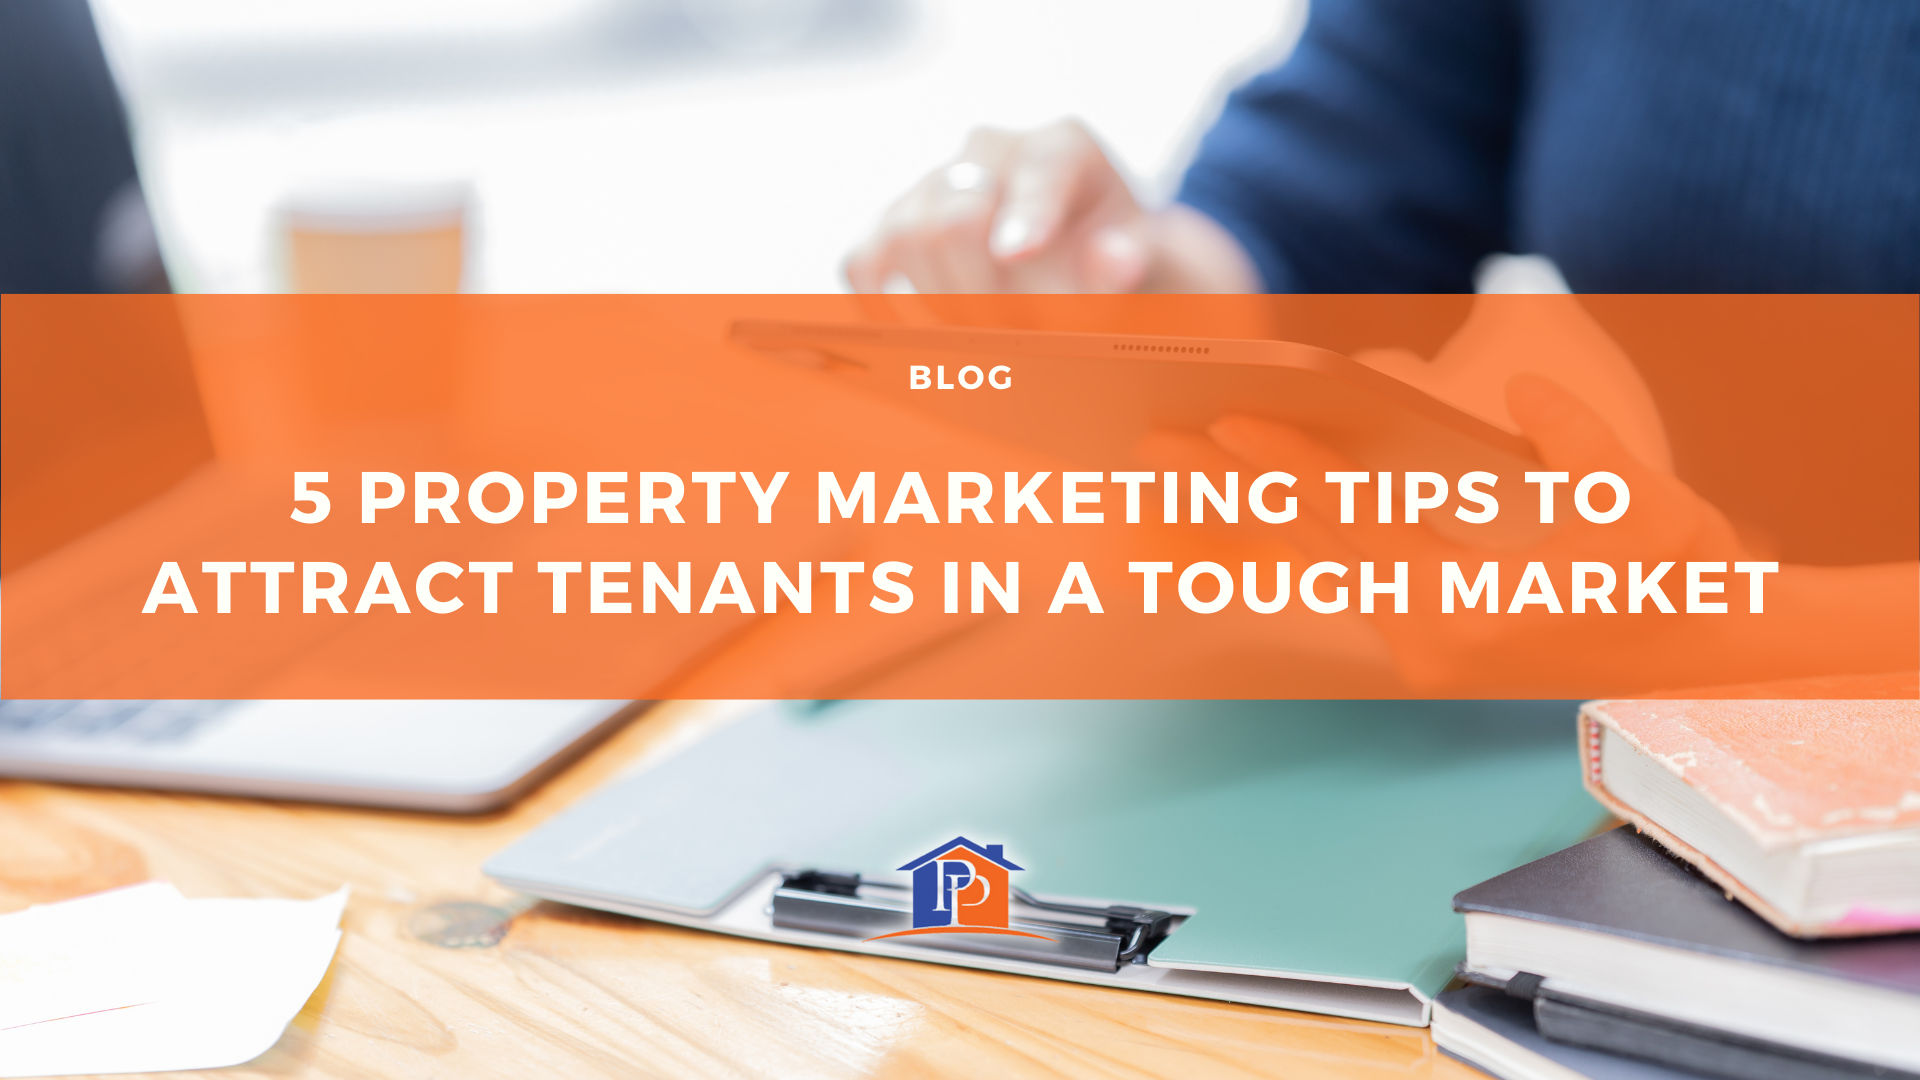 5 Property Marketing Tips to Attract Tenants in a Tough Market